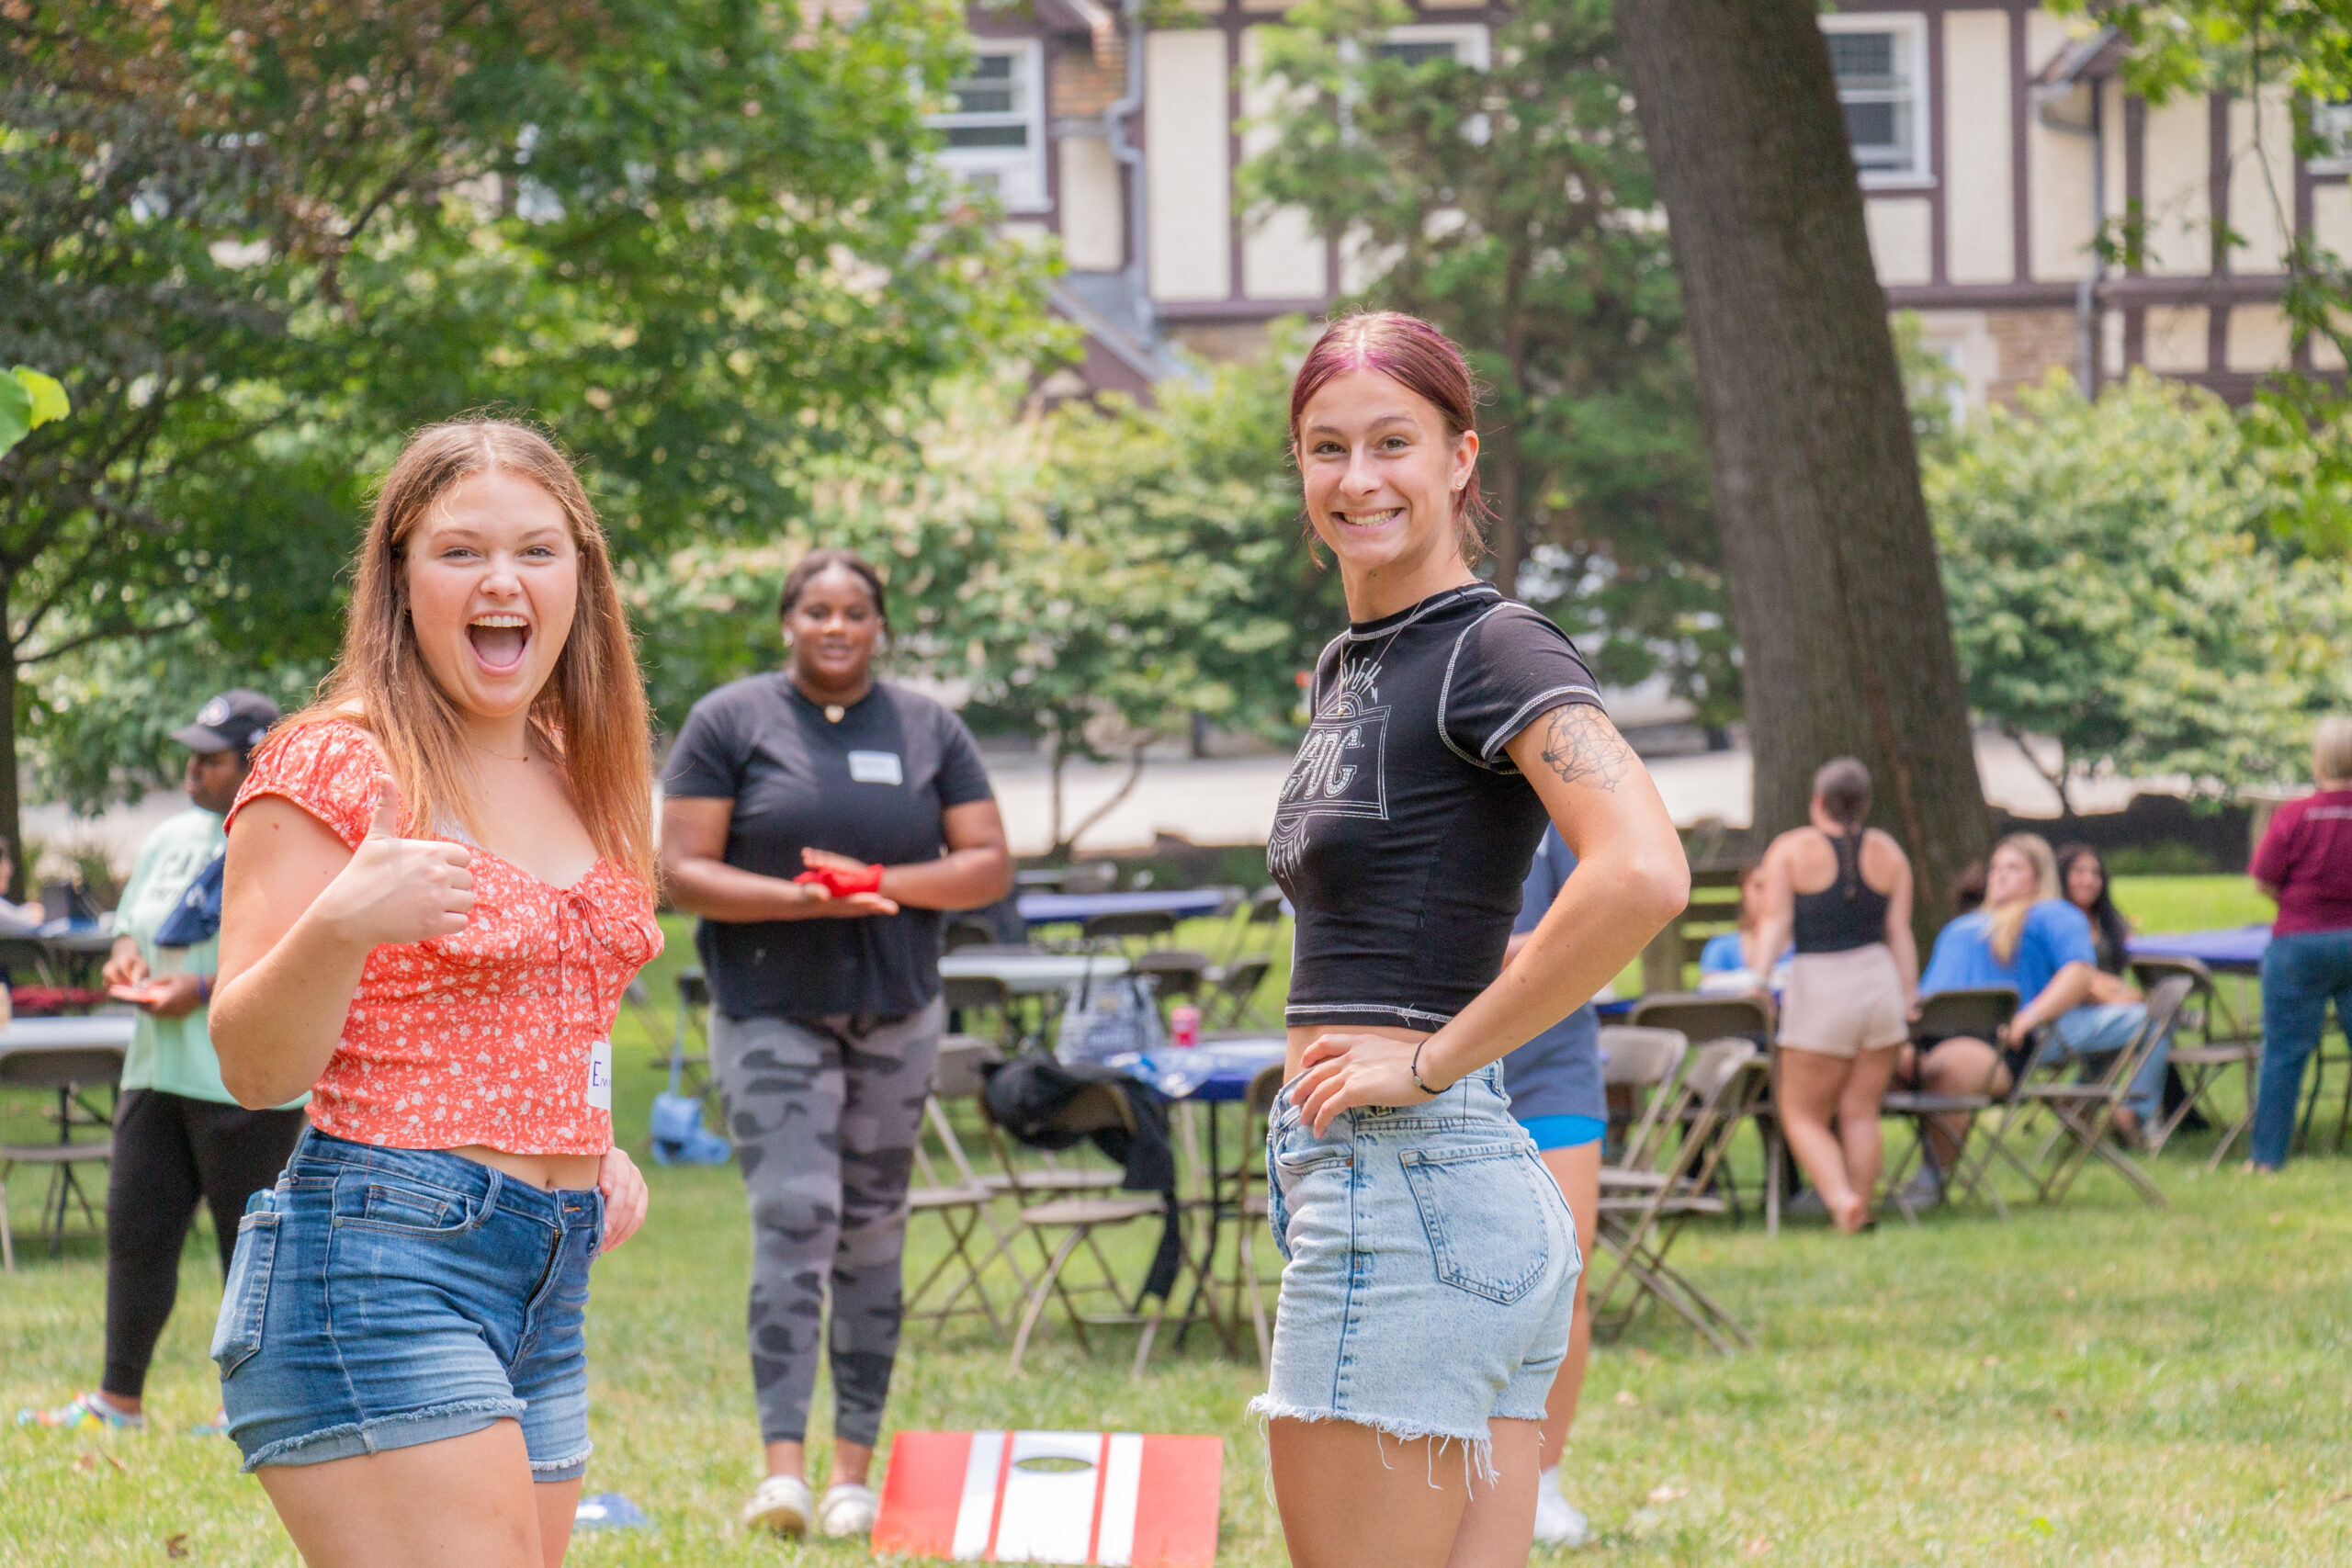 First-year students playing lawn games at their Beginnings Orientation in August. Photo via Cabrini University Flickr.